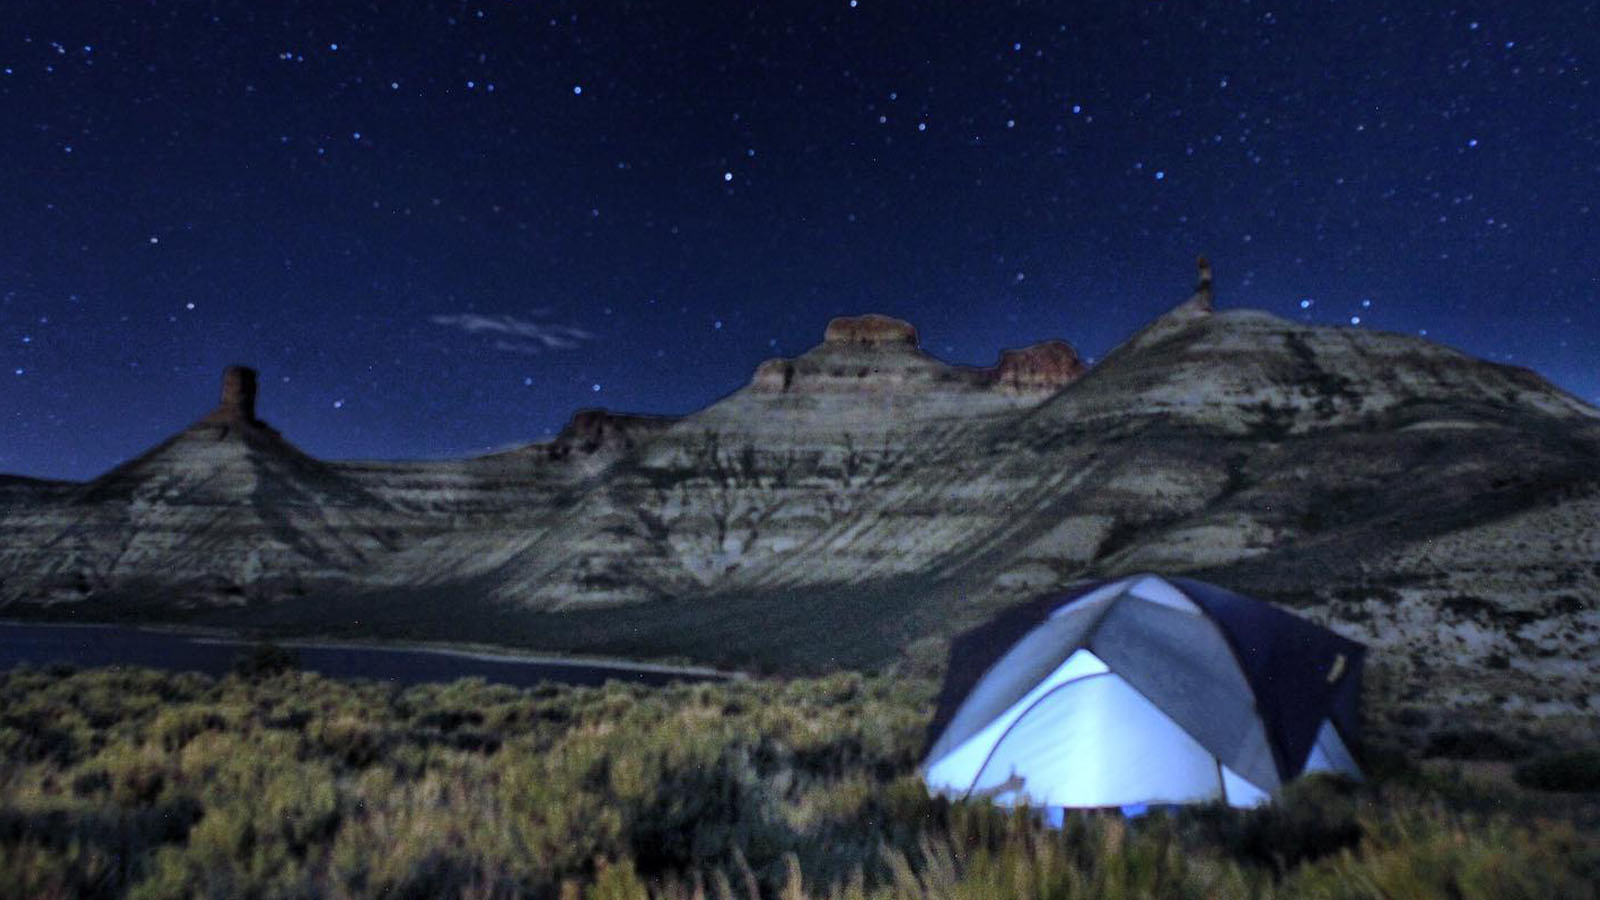 A tent glows from a campsite at the Flaming Gorge Reservoir, where bright stars beam, twinkling above. 